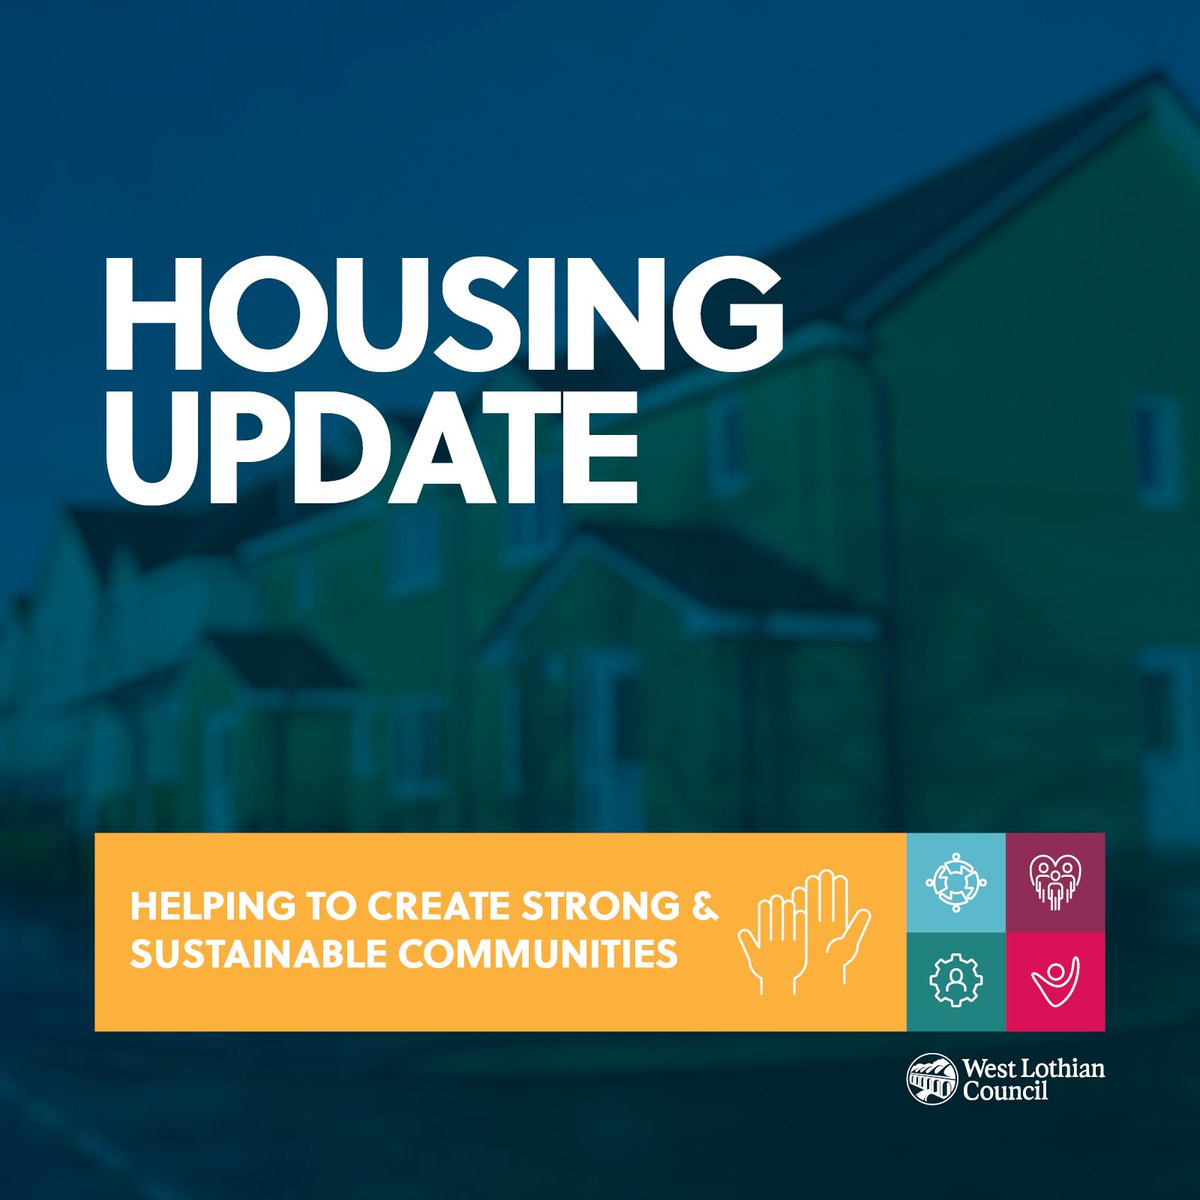 West Lothian Council has declared a Housing Emergency due to the specific pressures around housing and homelessness it faces. Full story at news.westlothian.gov.uk/article/82269/…